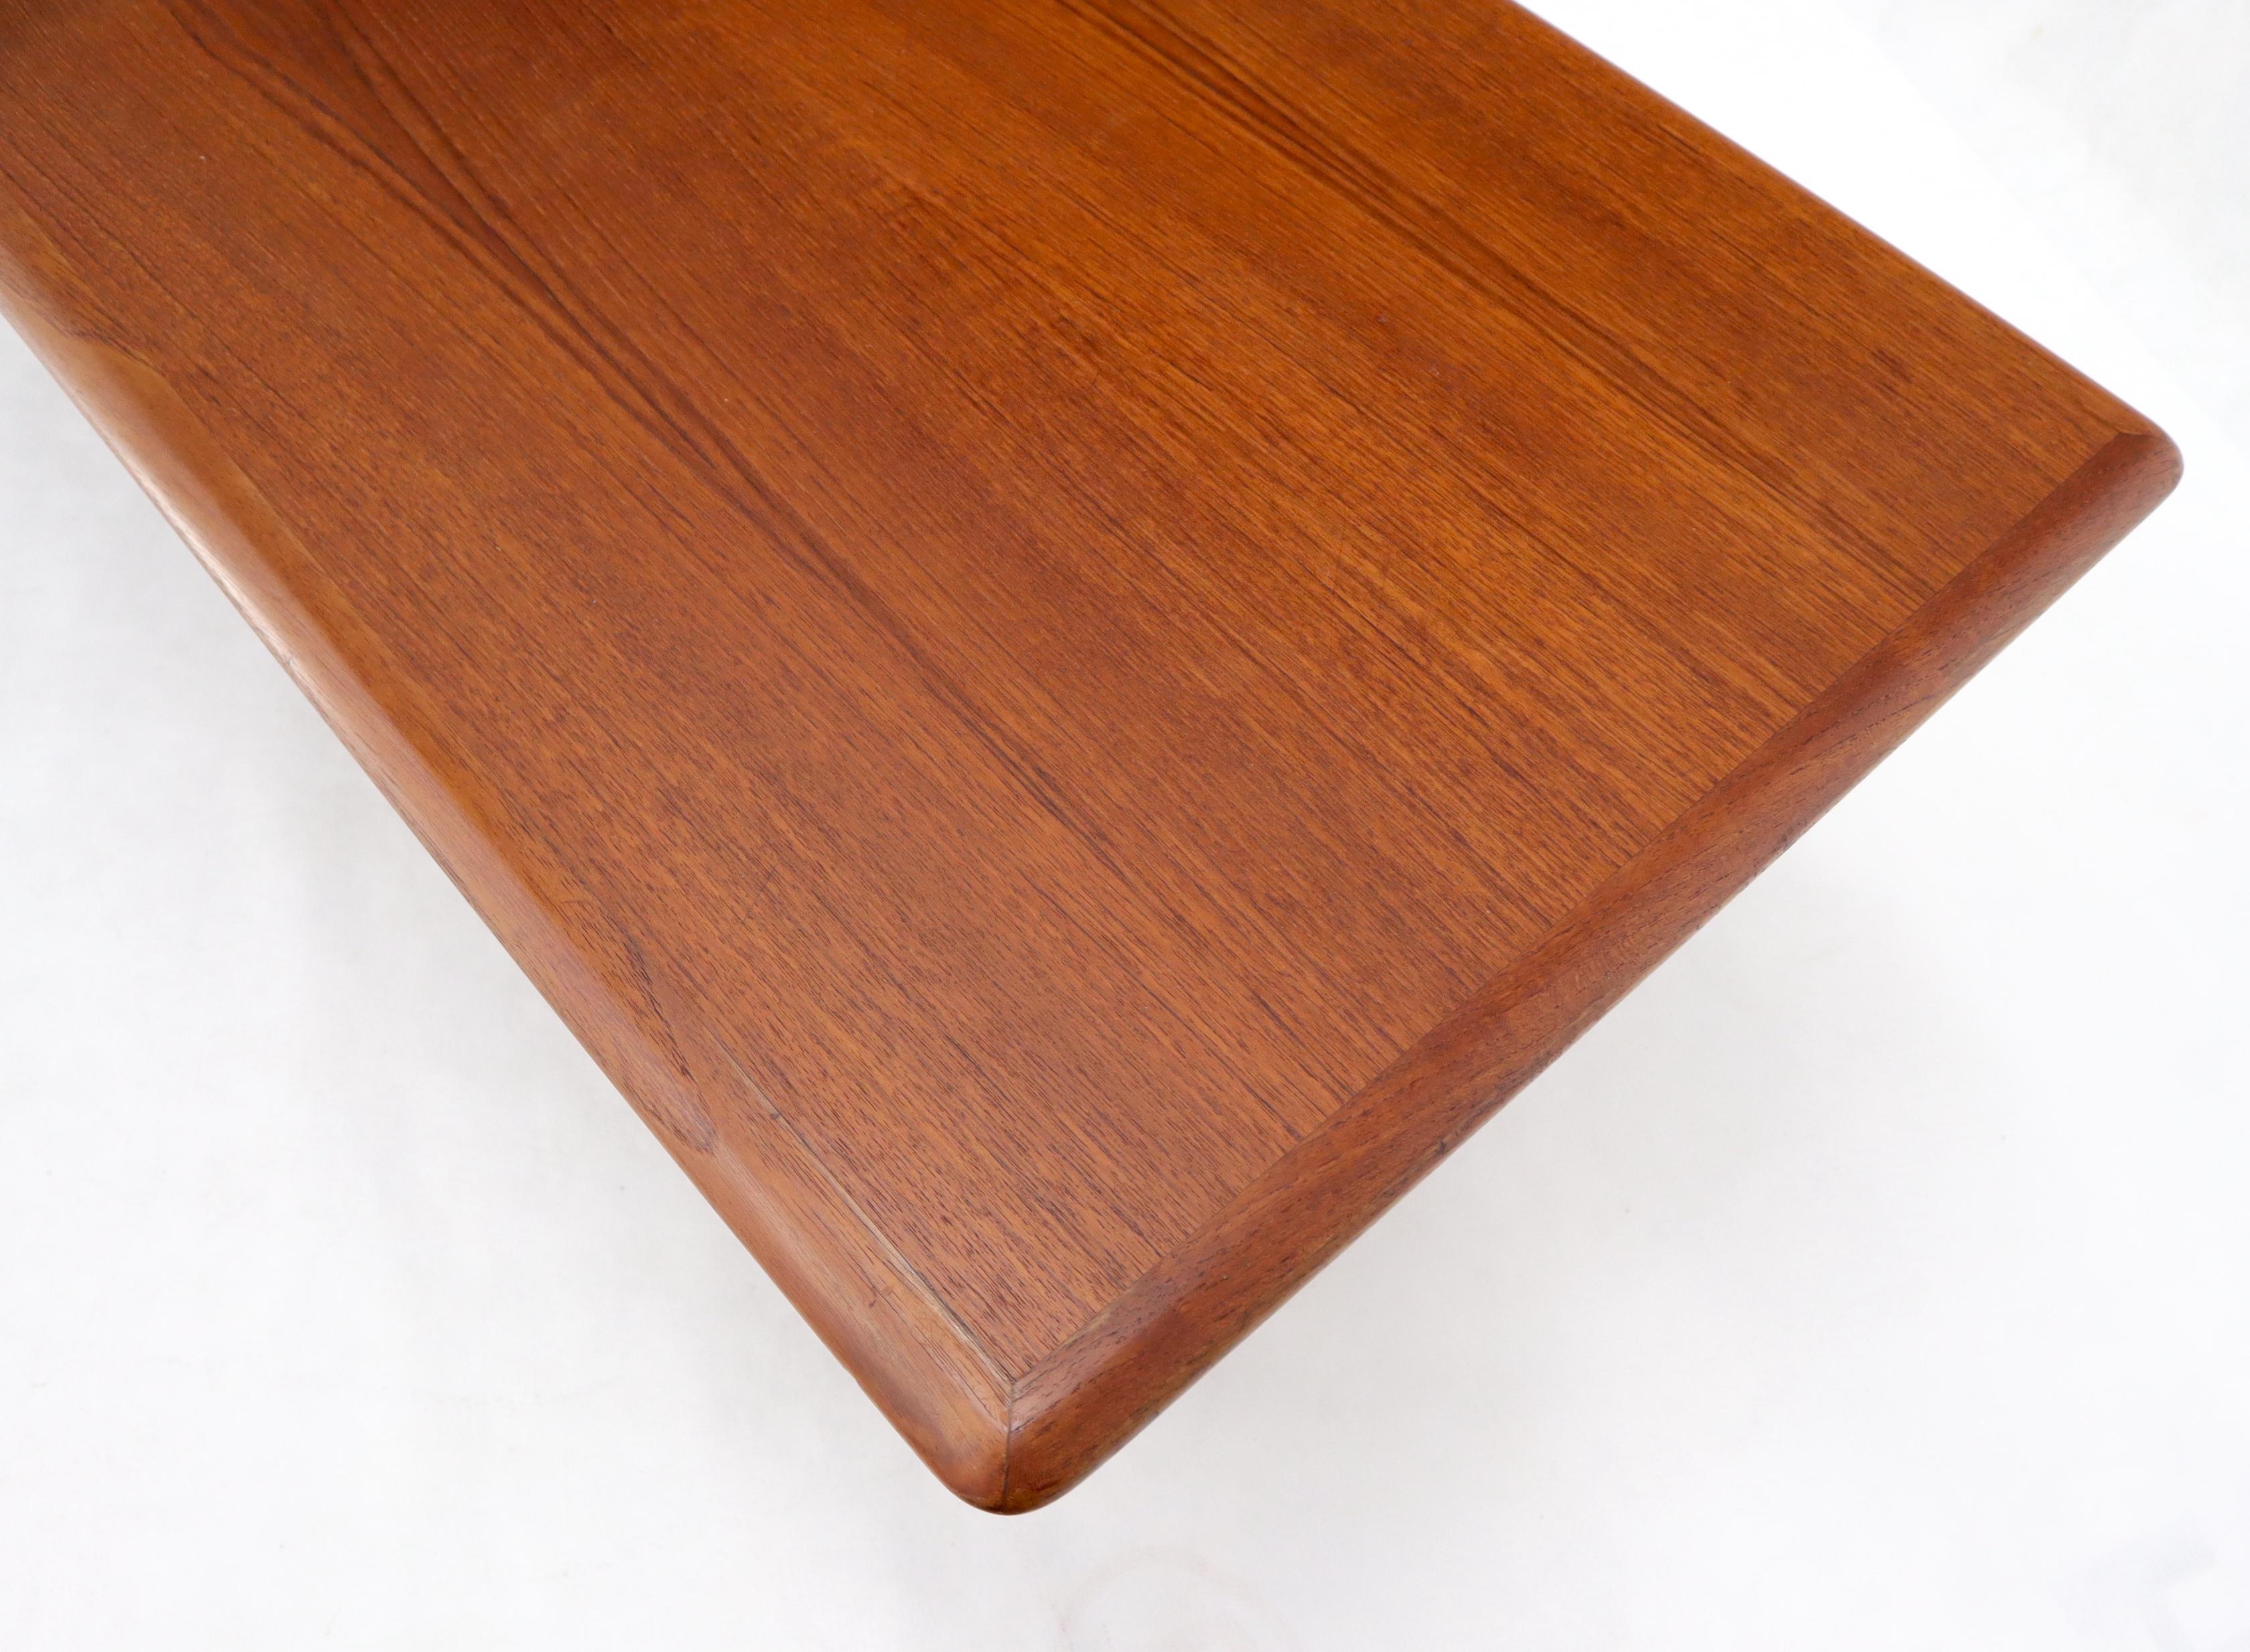 Lacquered Danish Teak Mid-Century Modern Rectangular Coffee Table with Cane Shelf For Sale